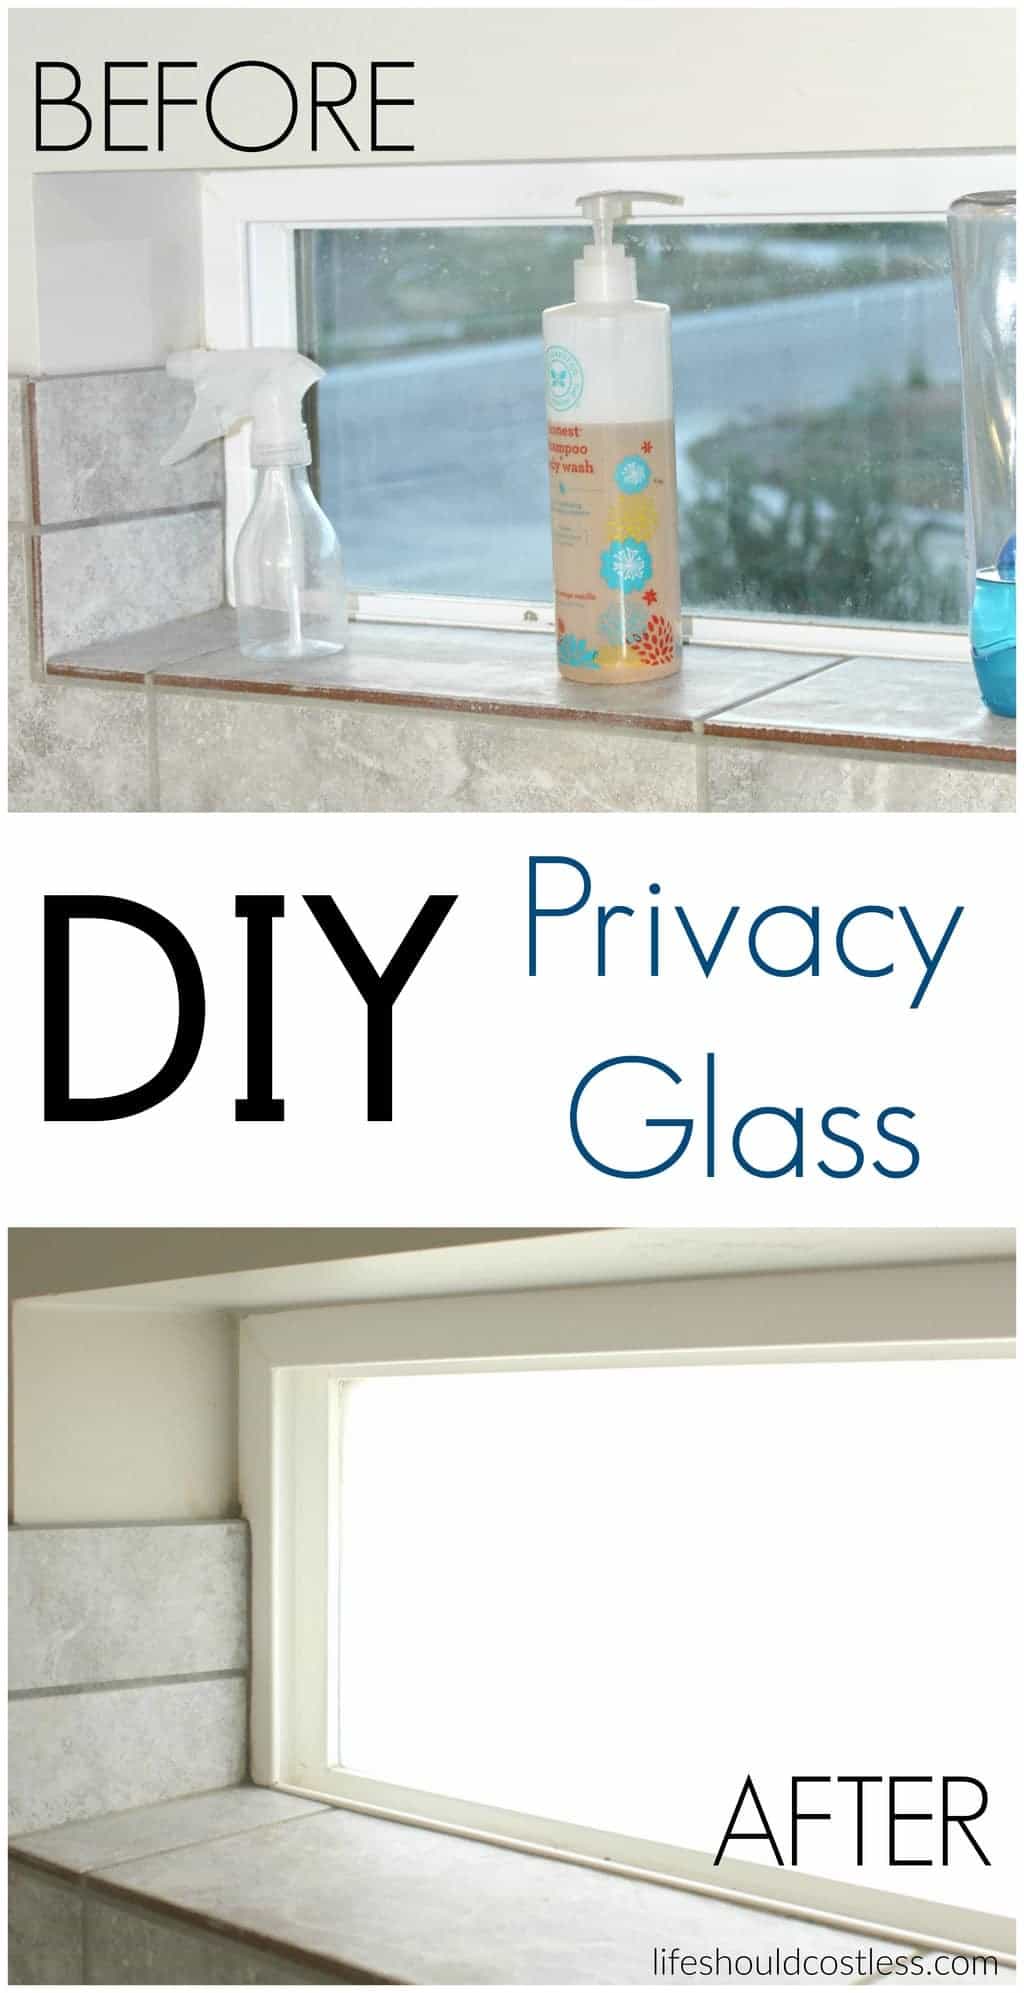 DIY Privacy Glass. It takes less than an hour and can easily be removed. {lifeshouldcostless.com}